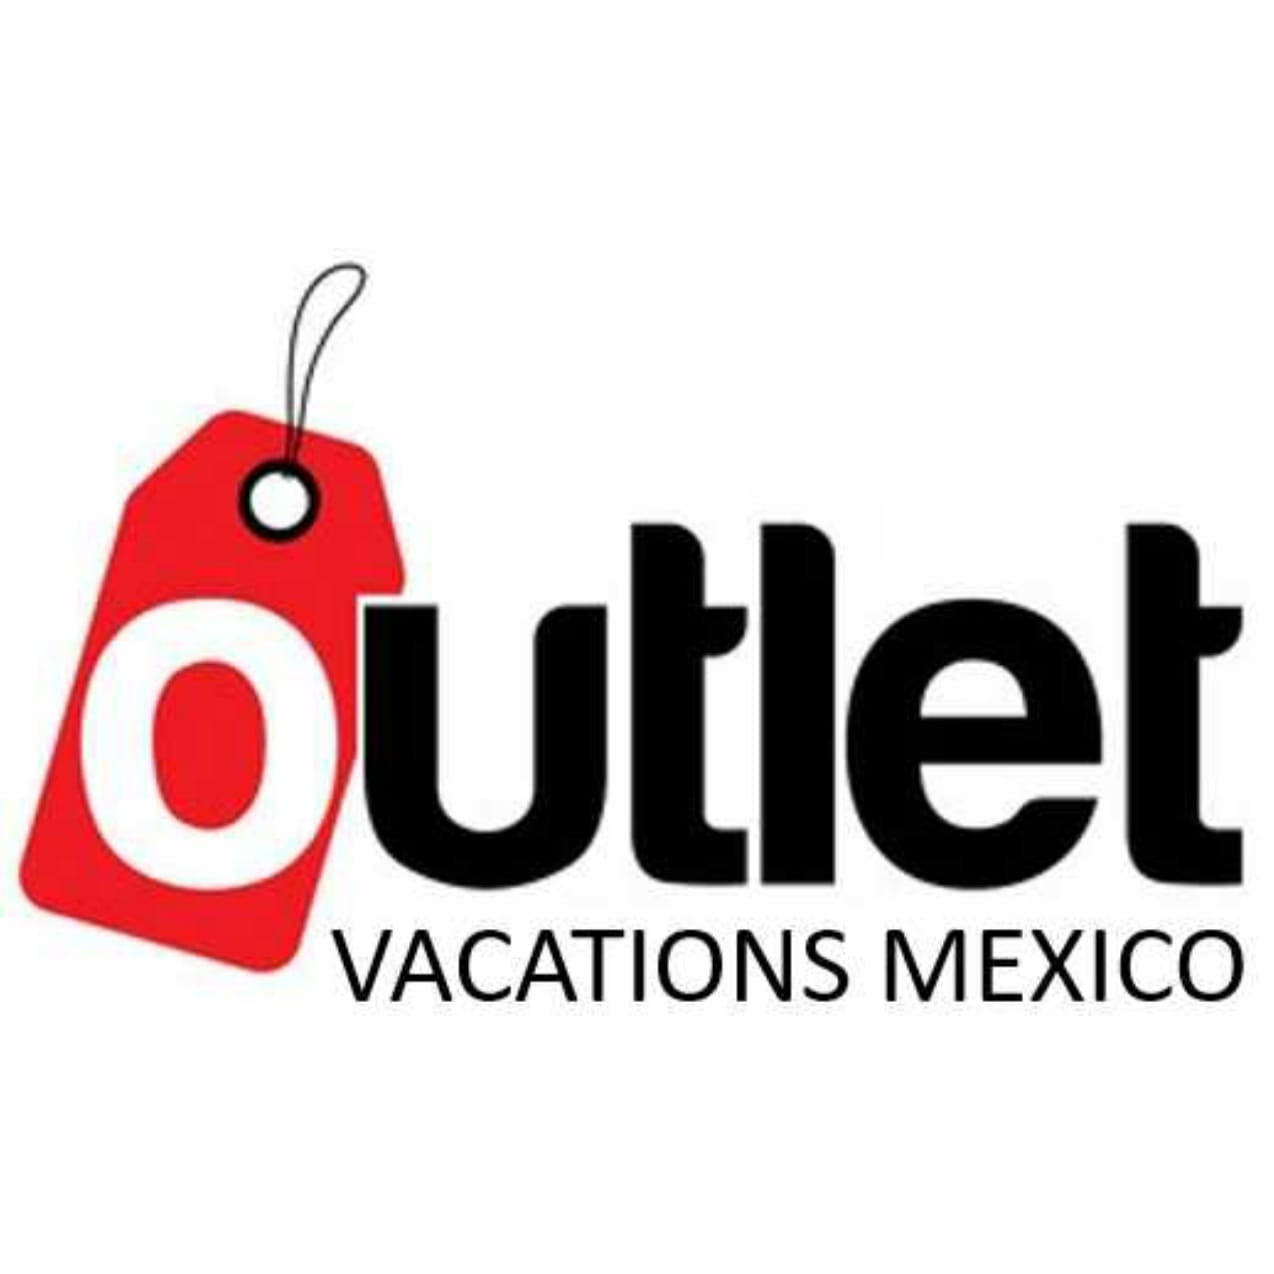 Outlet Vacations Mexico